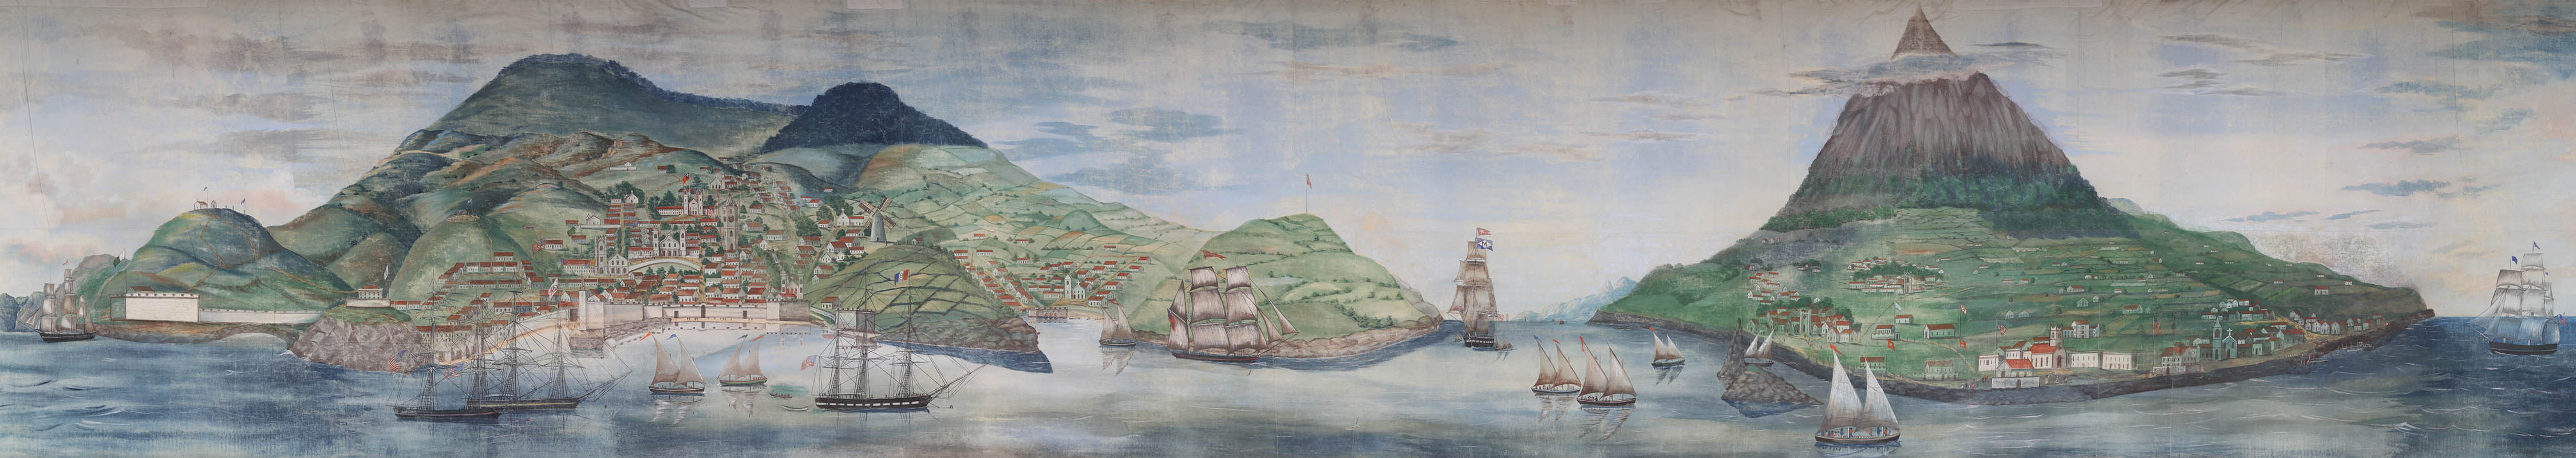 The grand panorama of a whaling voyage ‘round the world